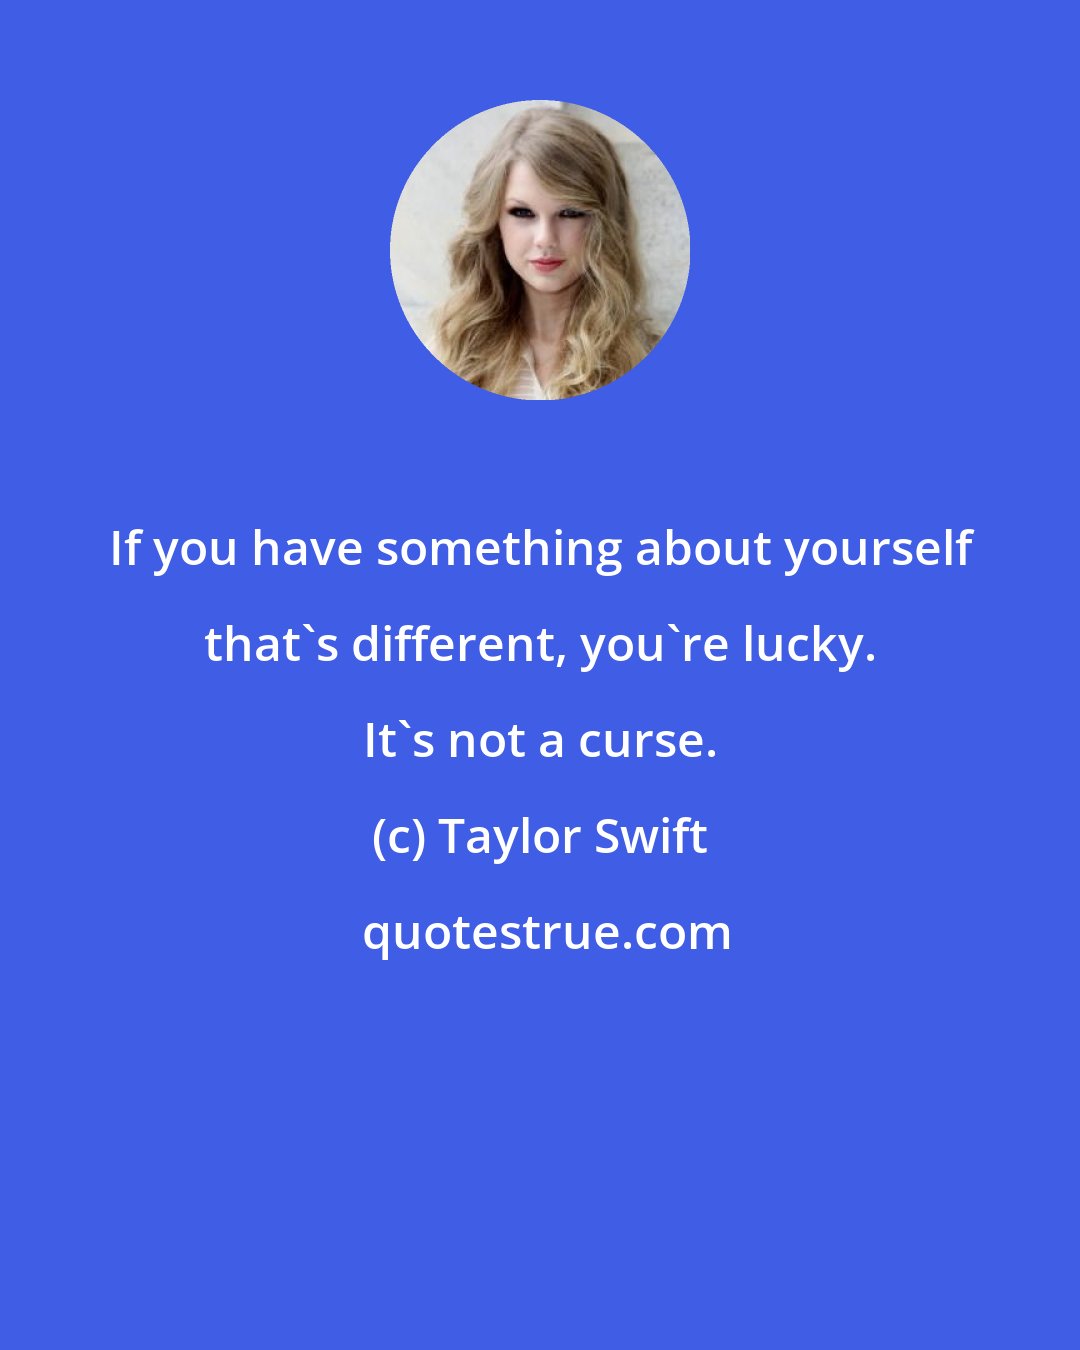 Taylor Swift: If you have something about yourself that's different, you're lucky. It's not a curse.